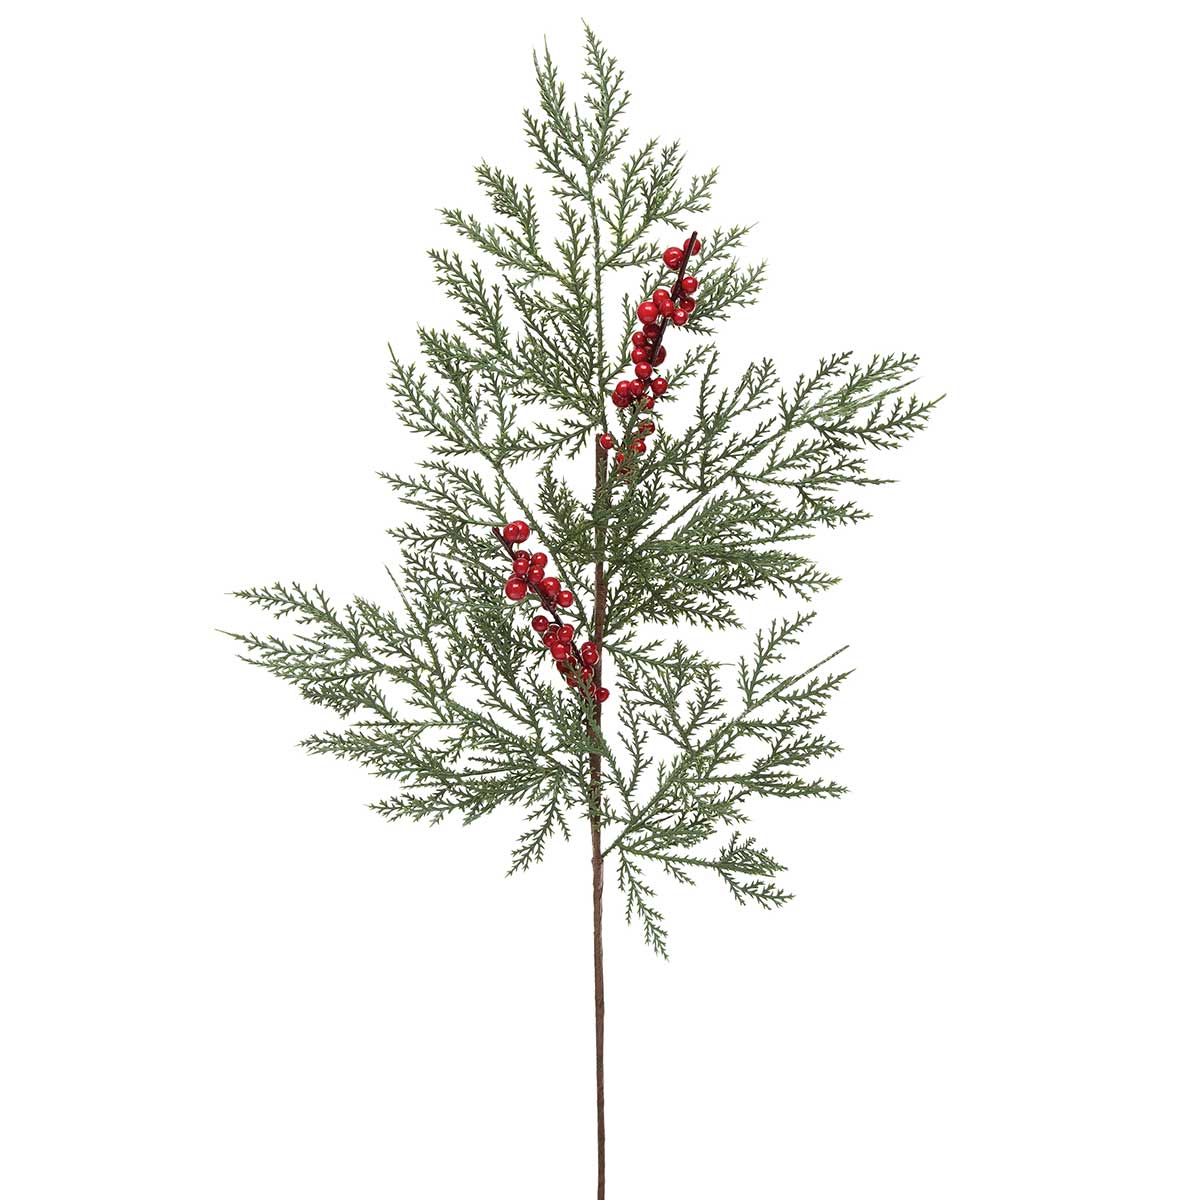 CEDAR SPRAY WITH RED BERRIES 31"